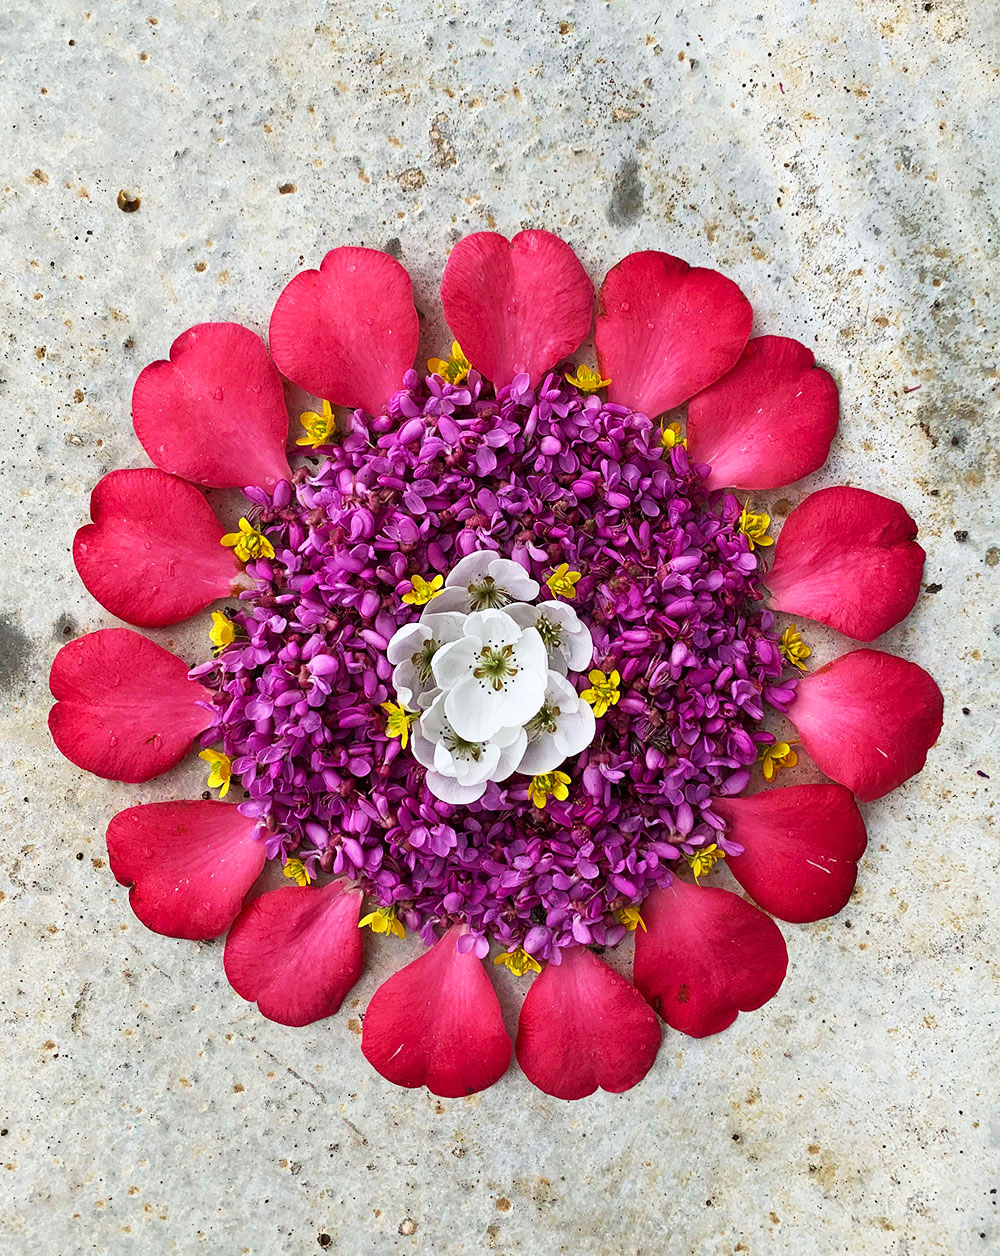 Several flowers are picked and laid out on the ground in a circle. Starting with the outer layer we have hot pink, next is purple, and the center is white - with hints of yellow smaller flowers on the outer side of the middle layer (purple).